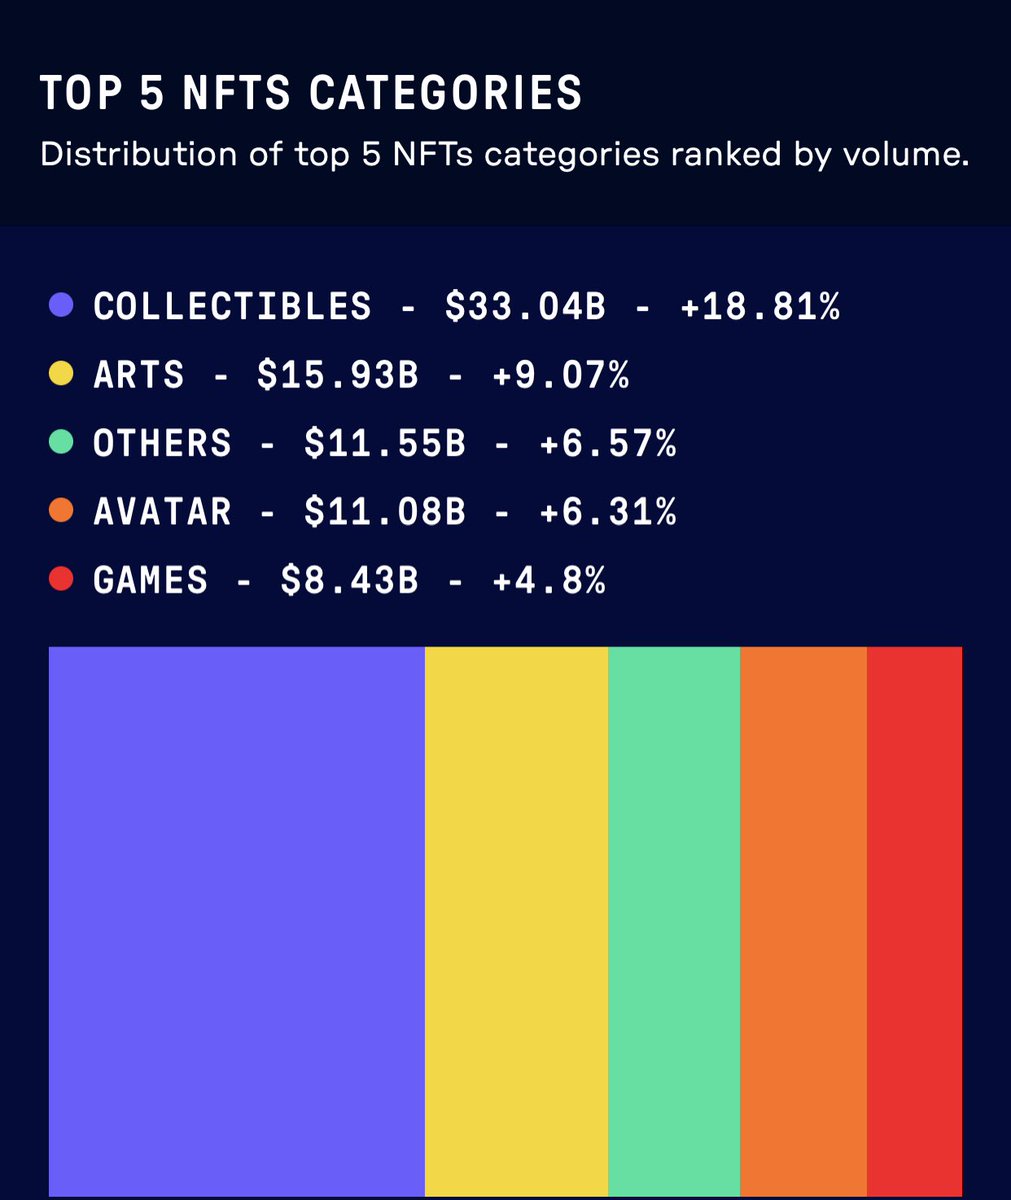 Hey
@bitsCrunch #unleashNFTs explore and get more information on the distribution of the top 5 NFT categories ranked by volume, market cap, and traders.
Visit unleashnfts.com for more updates 
Join and support our BitsCrunch community: discord.gg/bitscrunch-off…